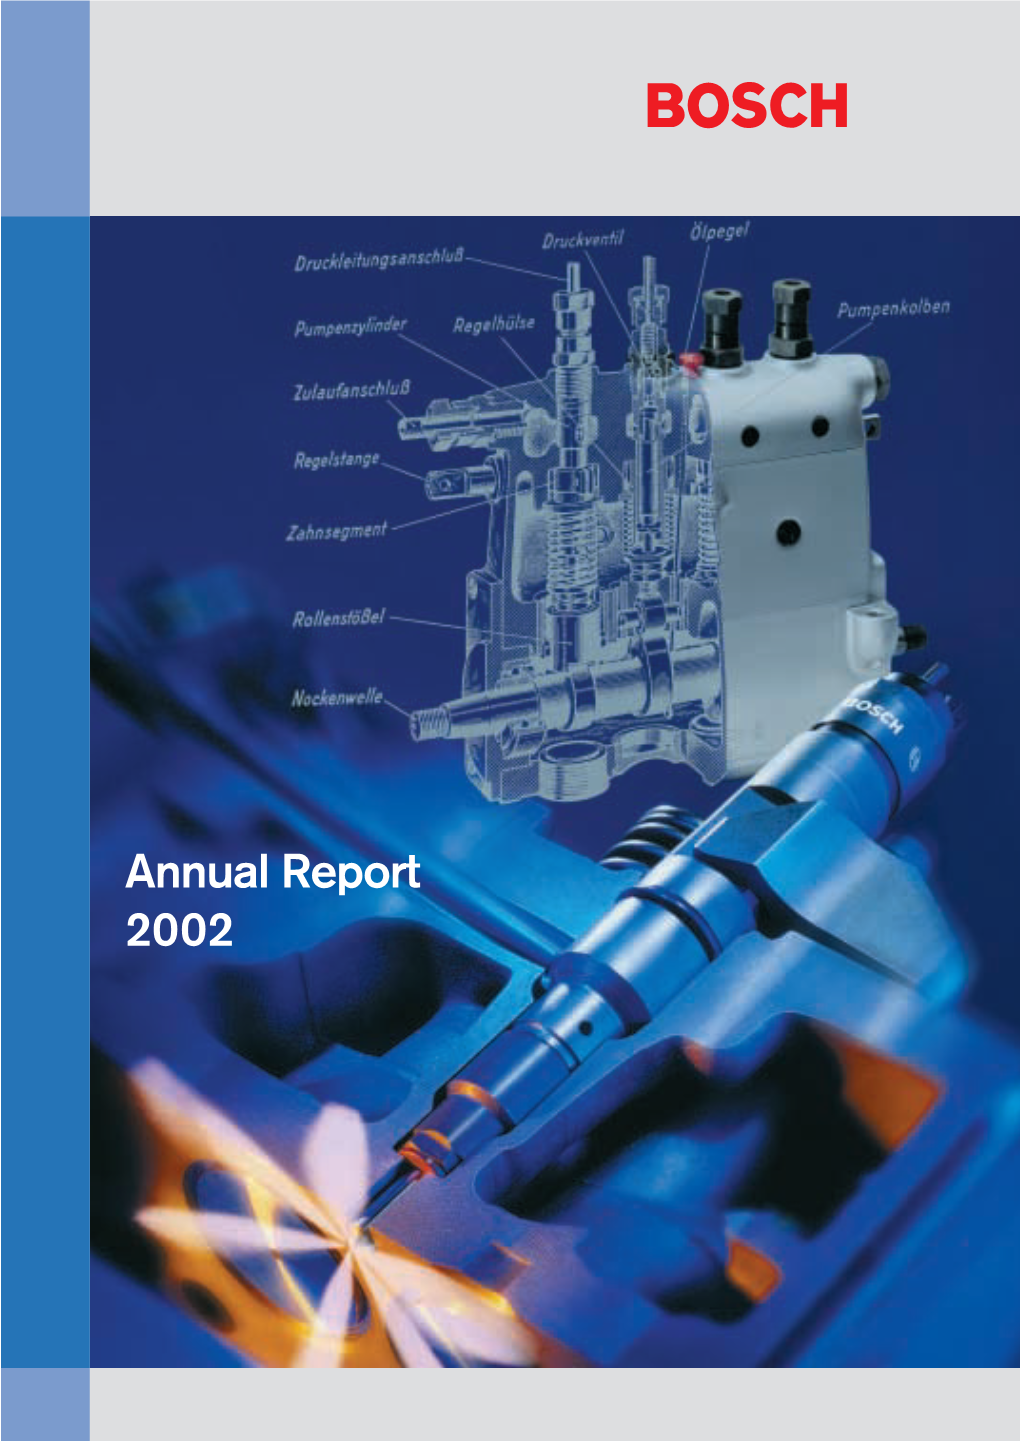 Annual Report 2002 Bosch Group